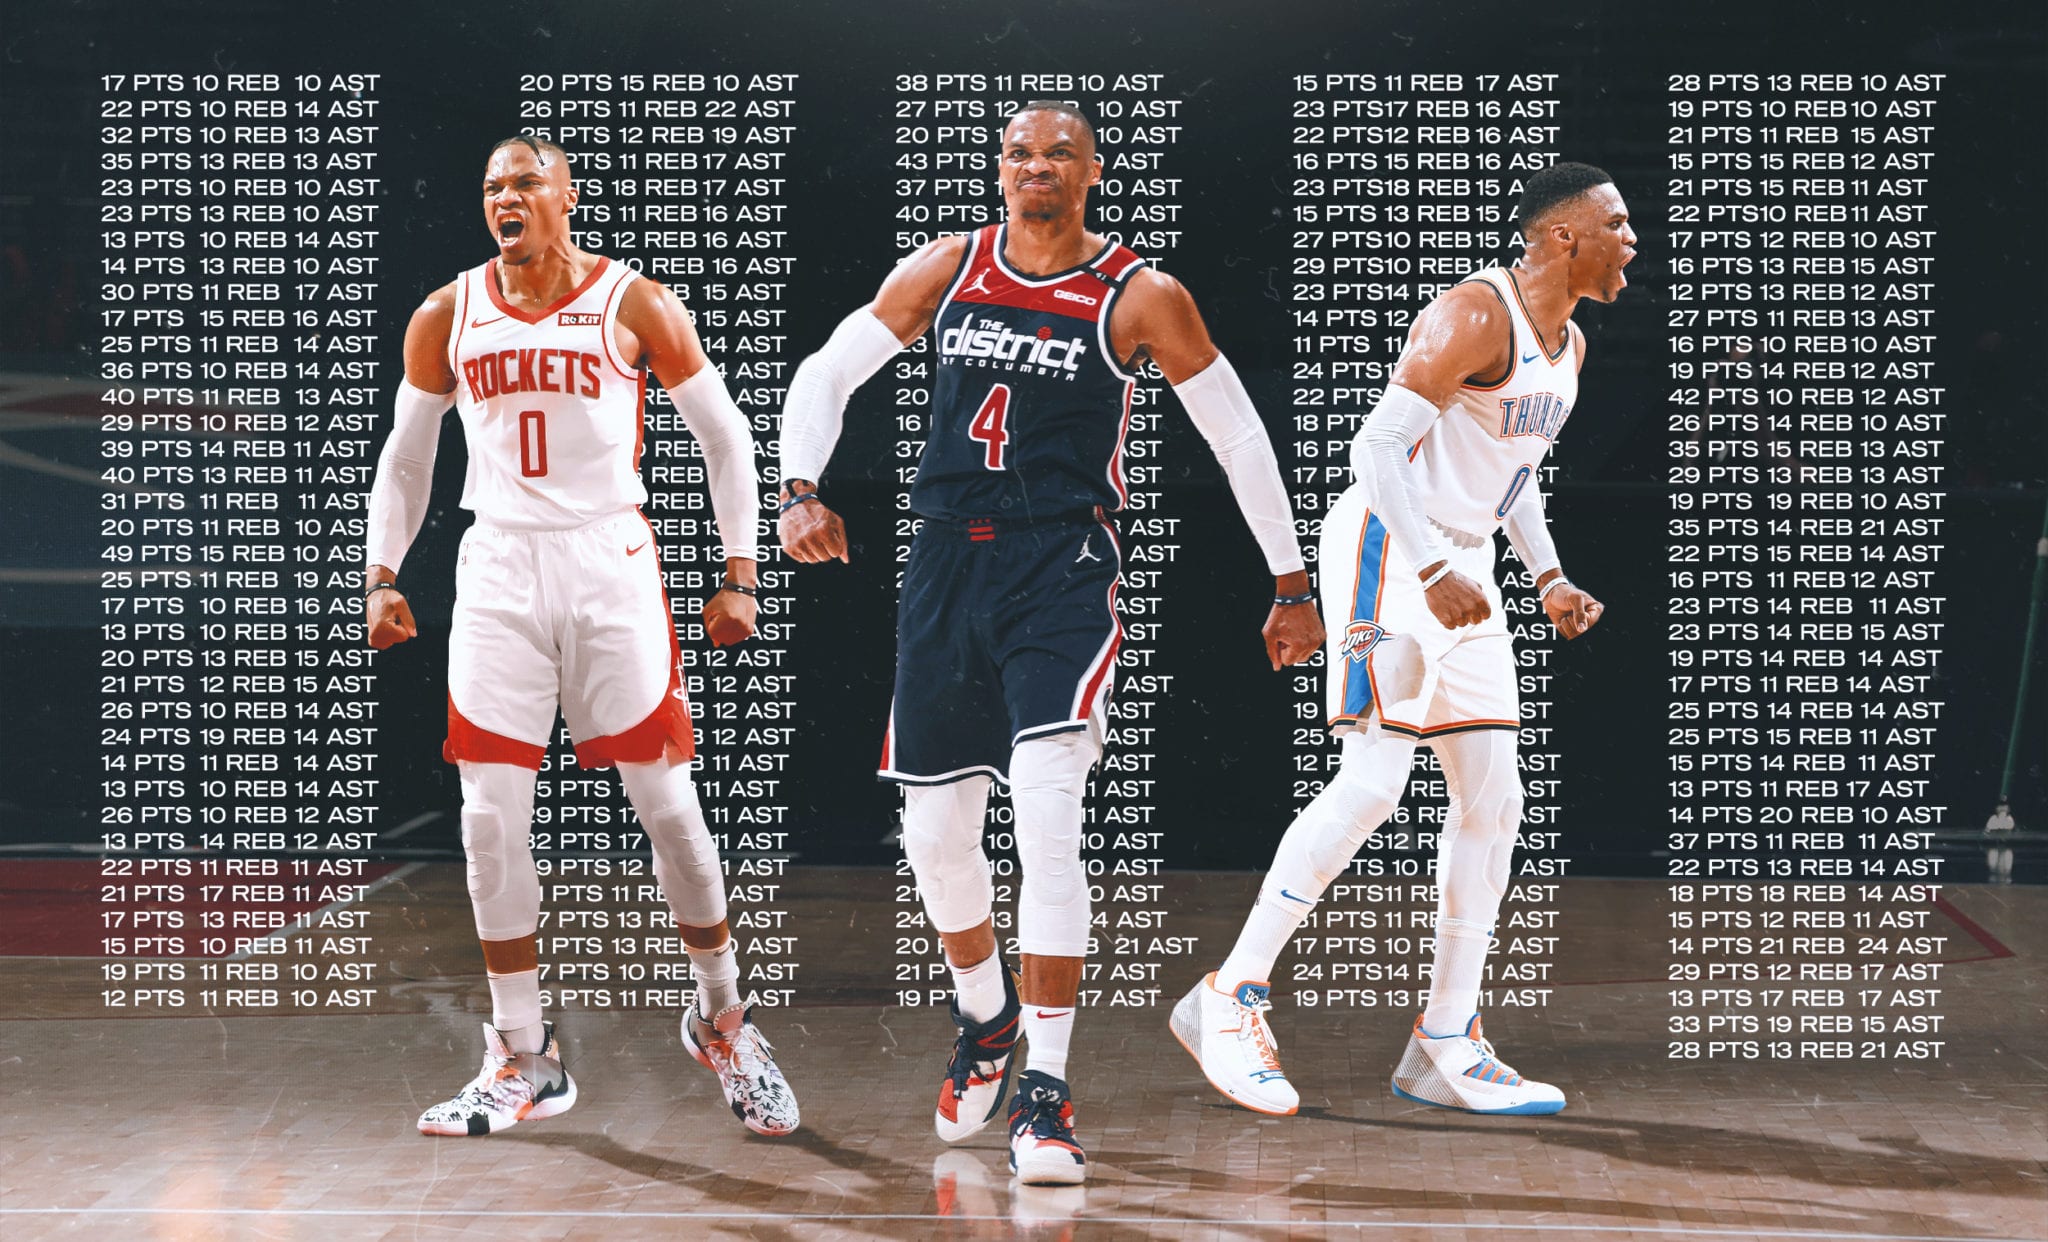 The Most Insane Records and Stats From Russell Westbrook’s Career